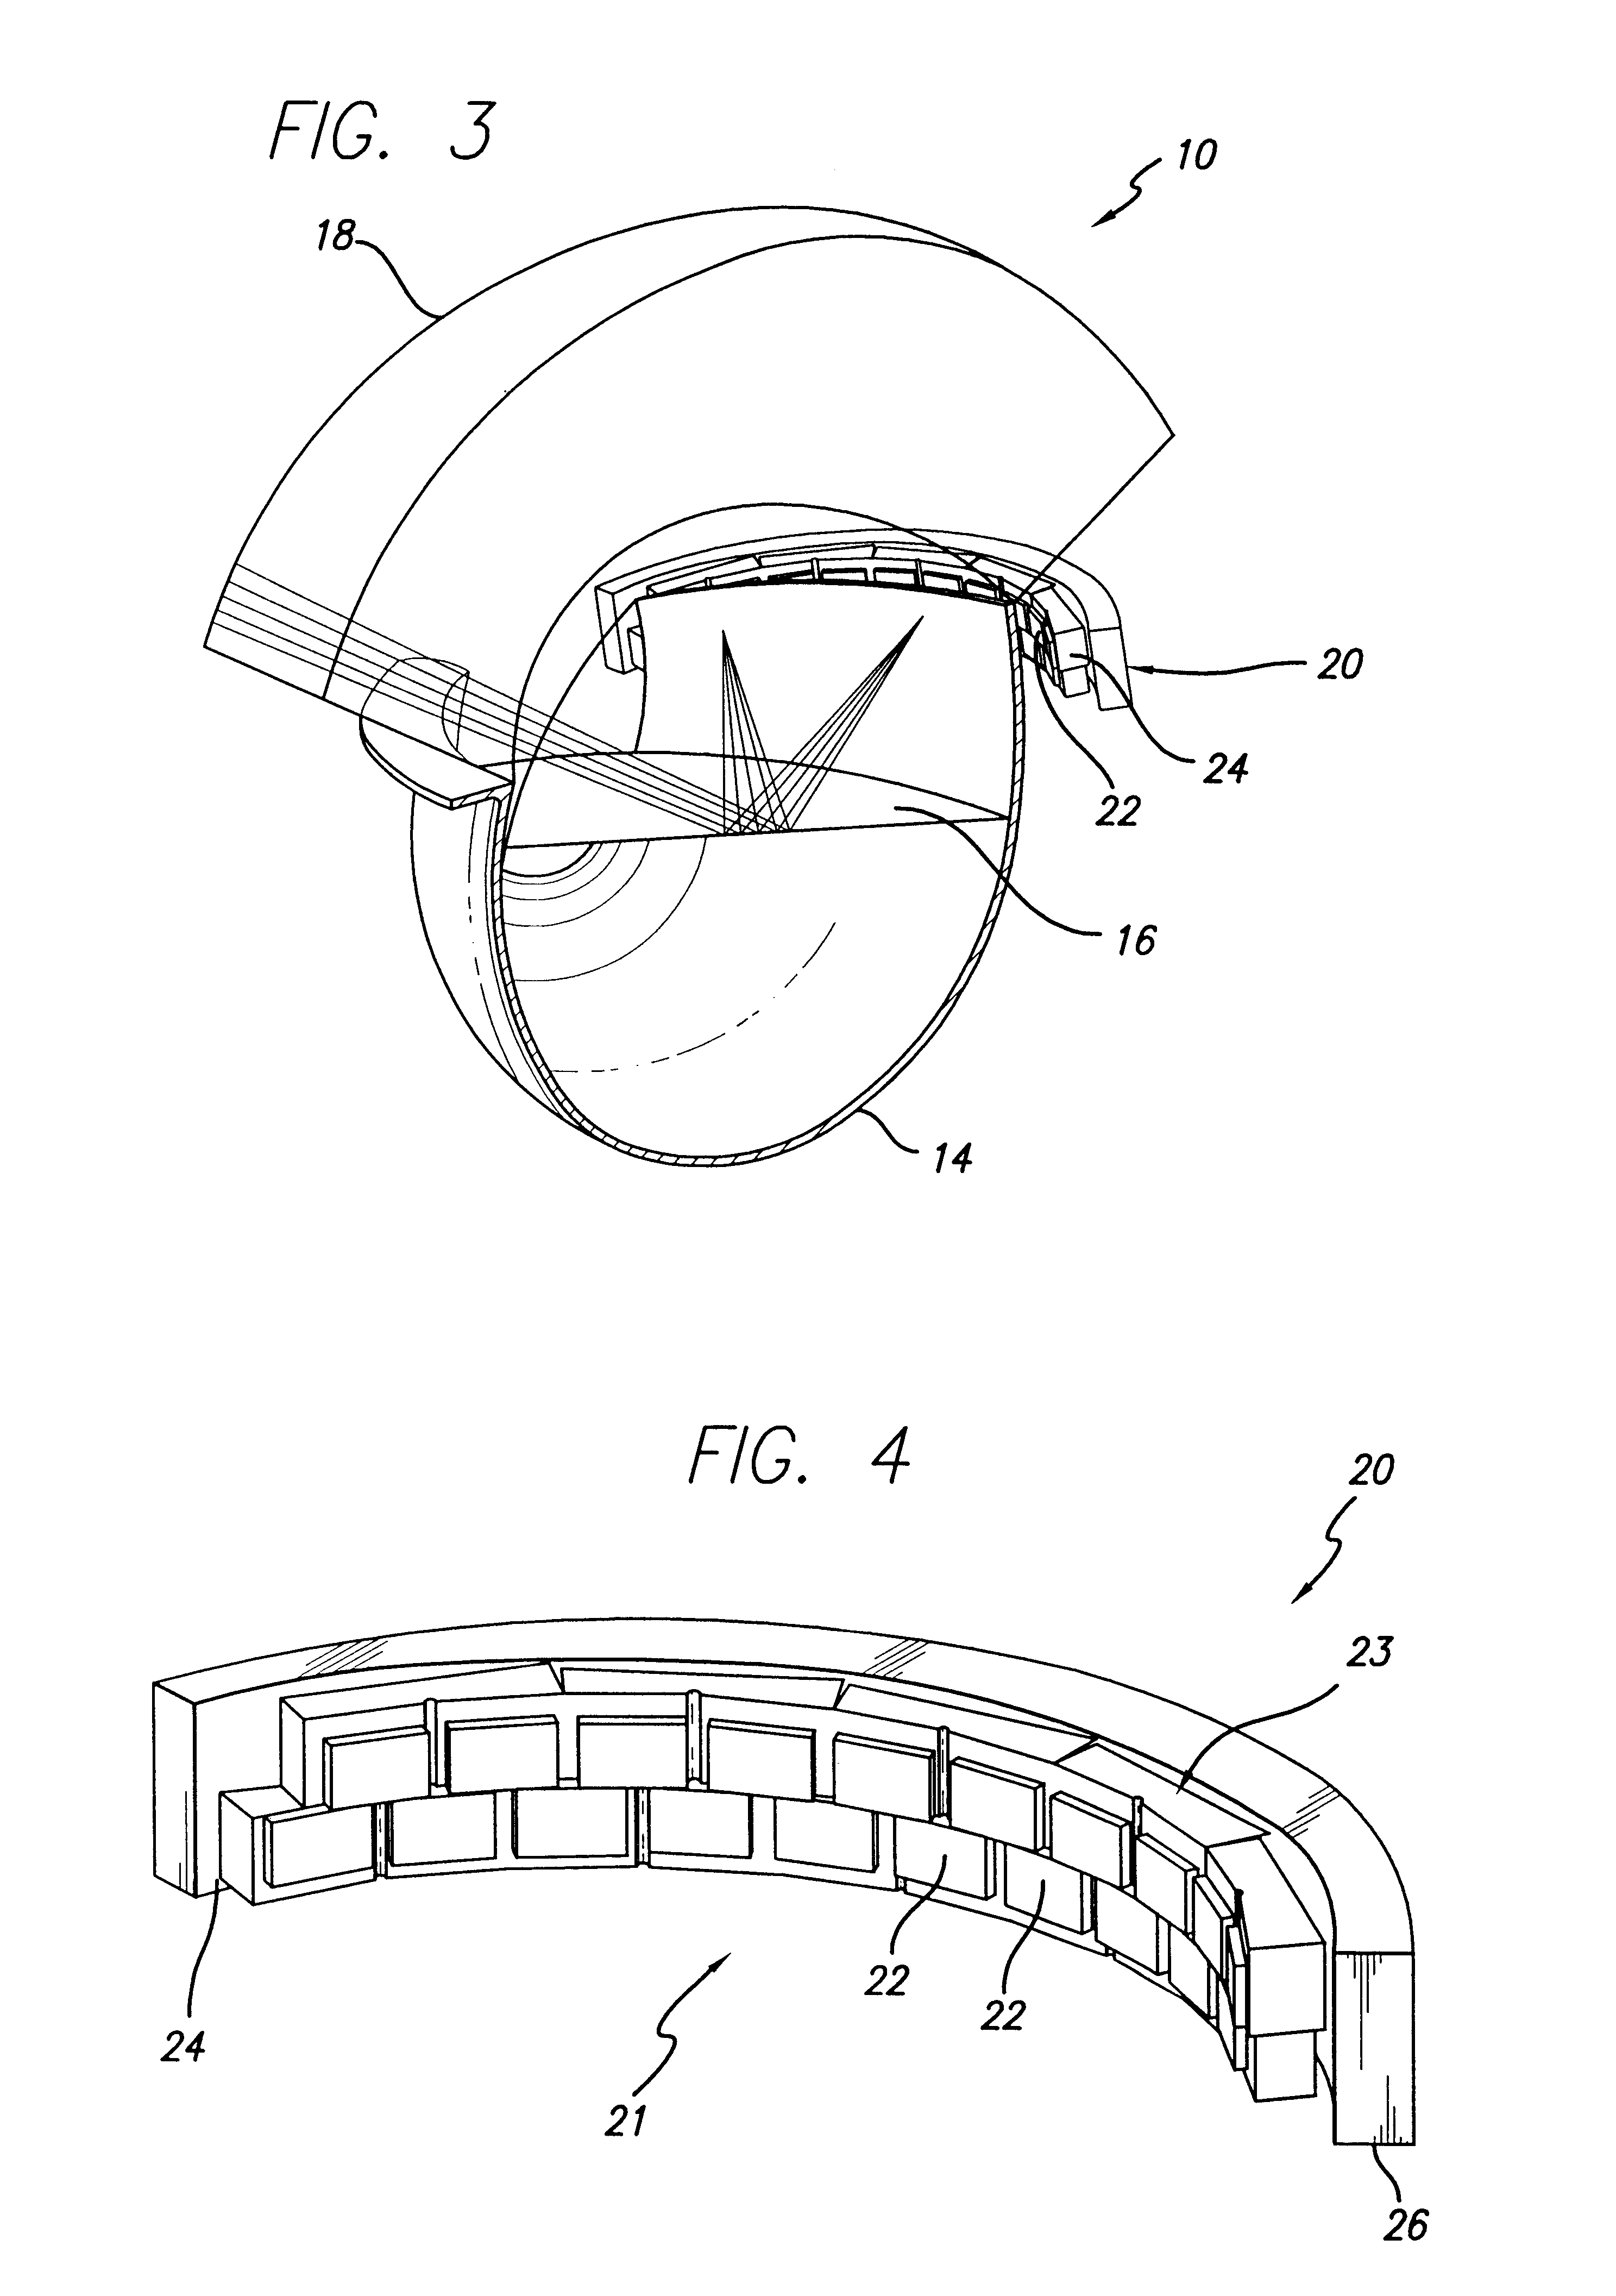 Ultra-wide field of view concentric scanning sensor system with a piece-wise focal plane array